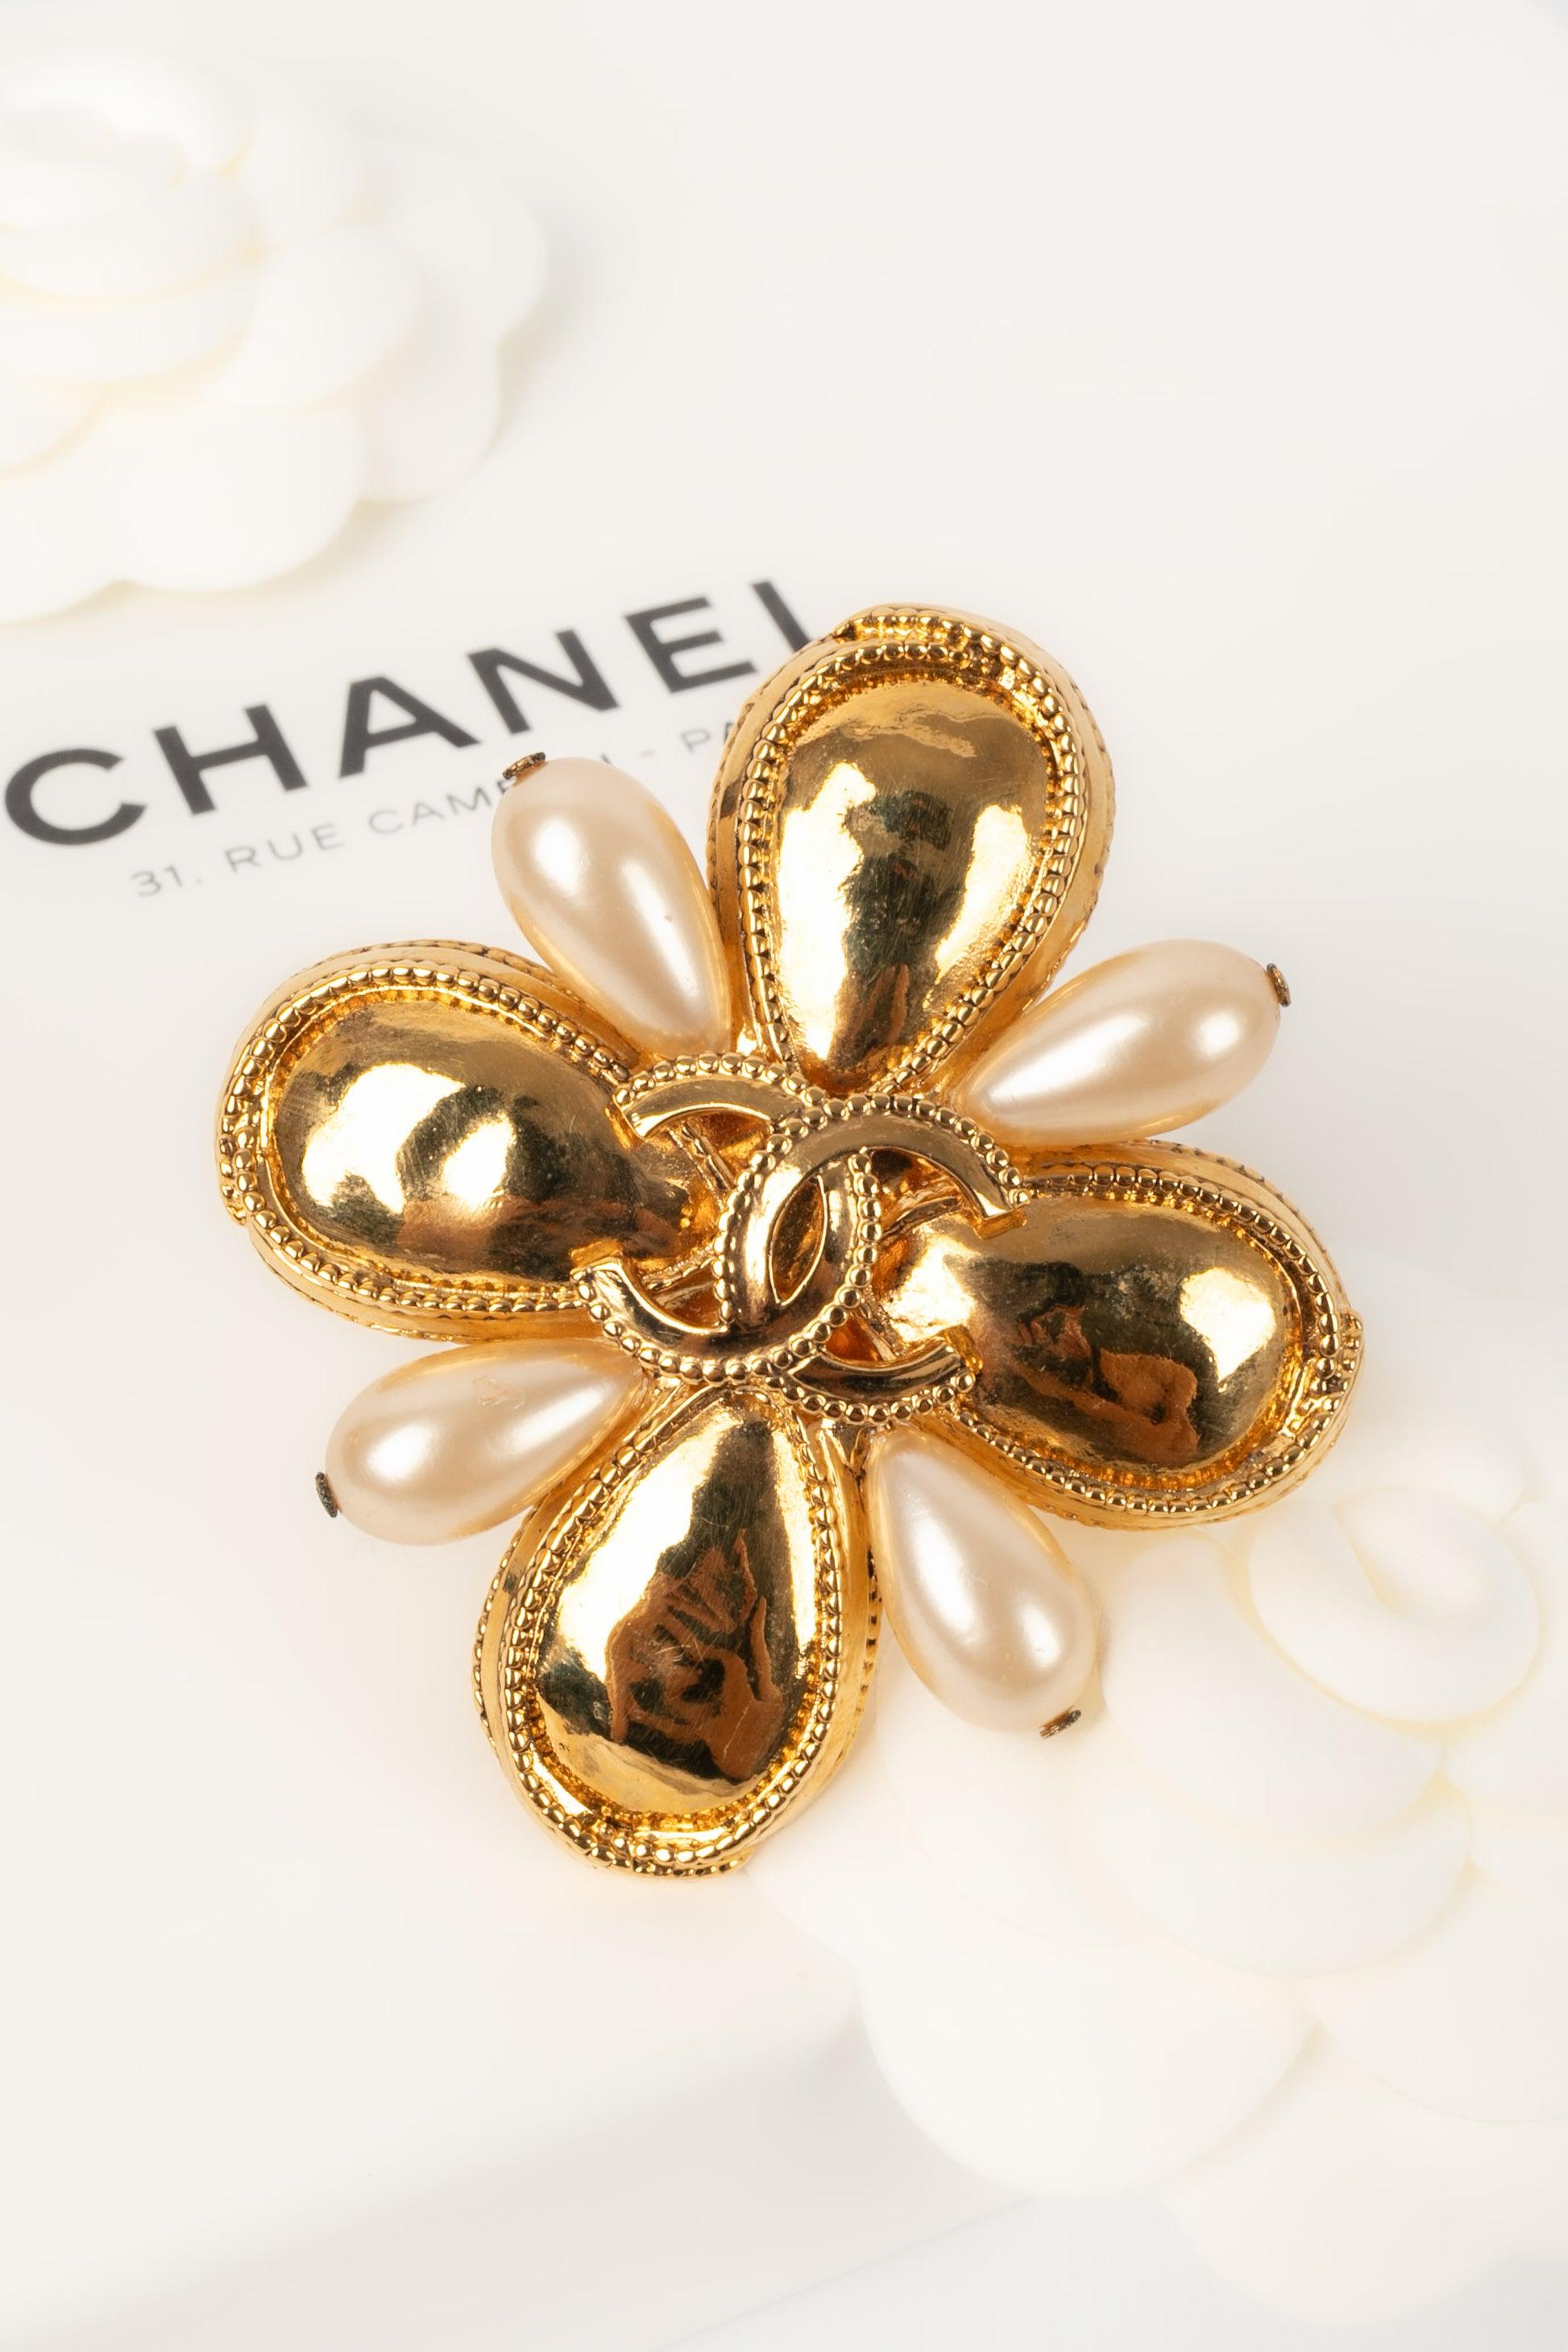 Chanel - (Made in France) Golden metal brooch with costume pearly drops. Fall-Winter 1997 Collection.

Additional information:
Condition: Very good condition
Dimensions: Height: 7 cm

Seller Reference: BRB172
